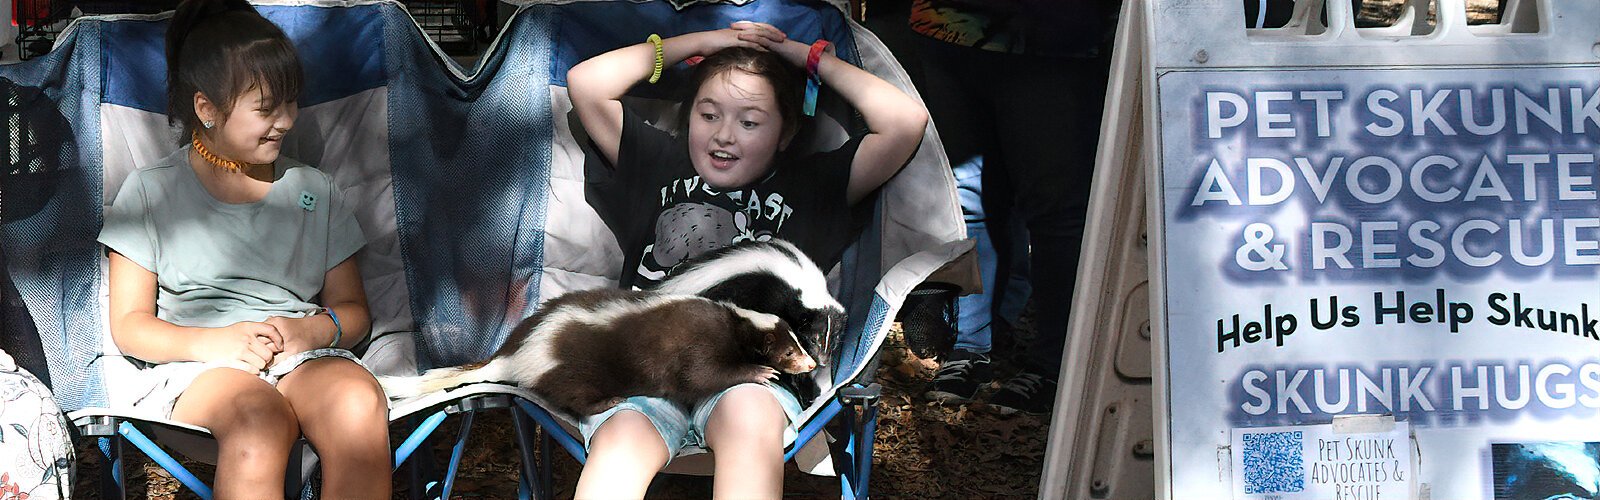 Brooklyn, 9, and Freya, 10, delight in the company of two lively skunks from the Pet Skunk Advocates & Rescue facility in Pinellas County.